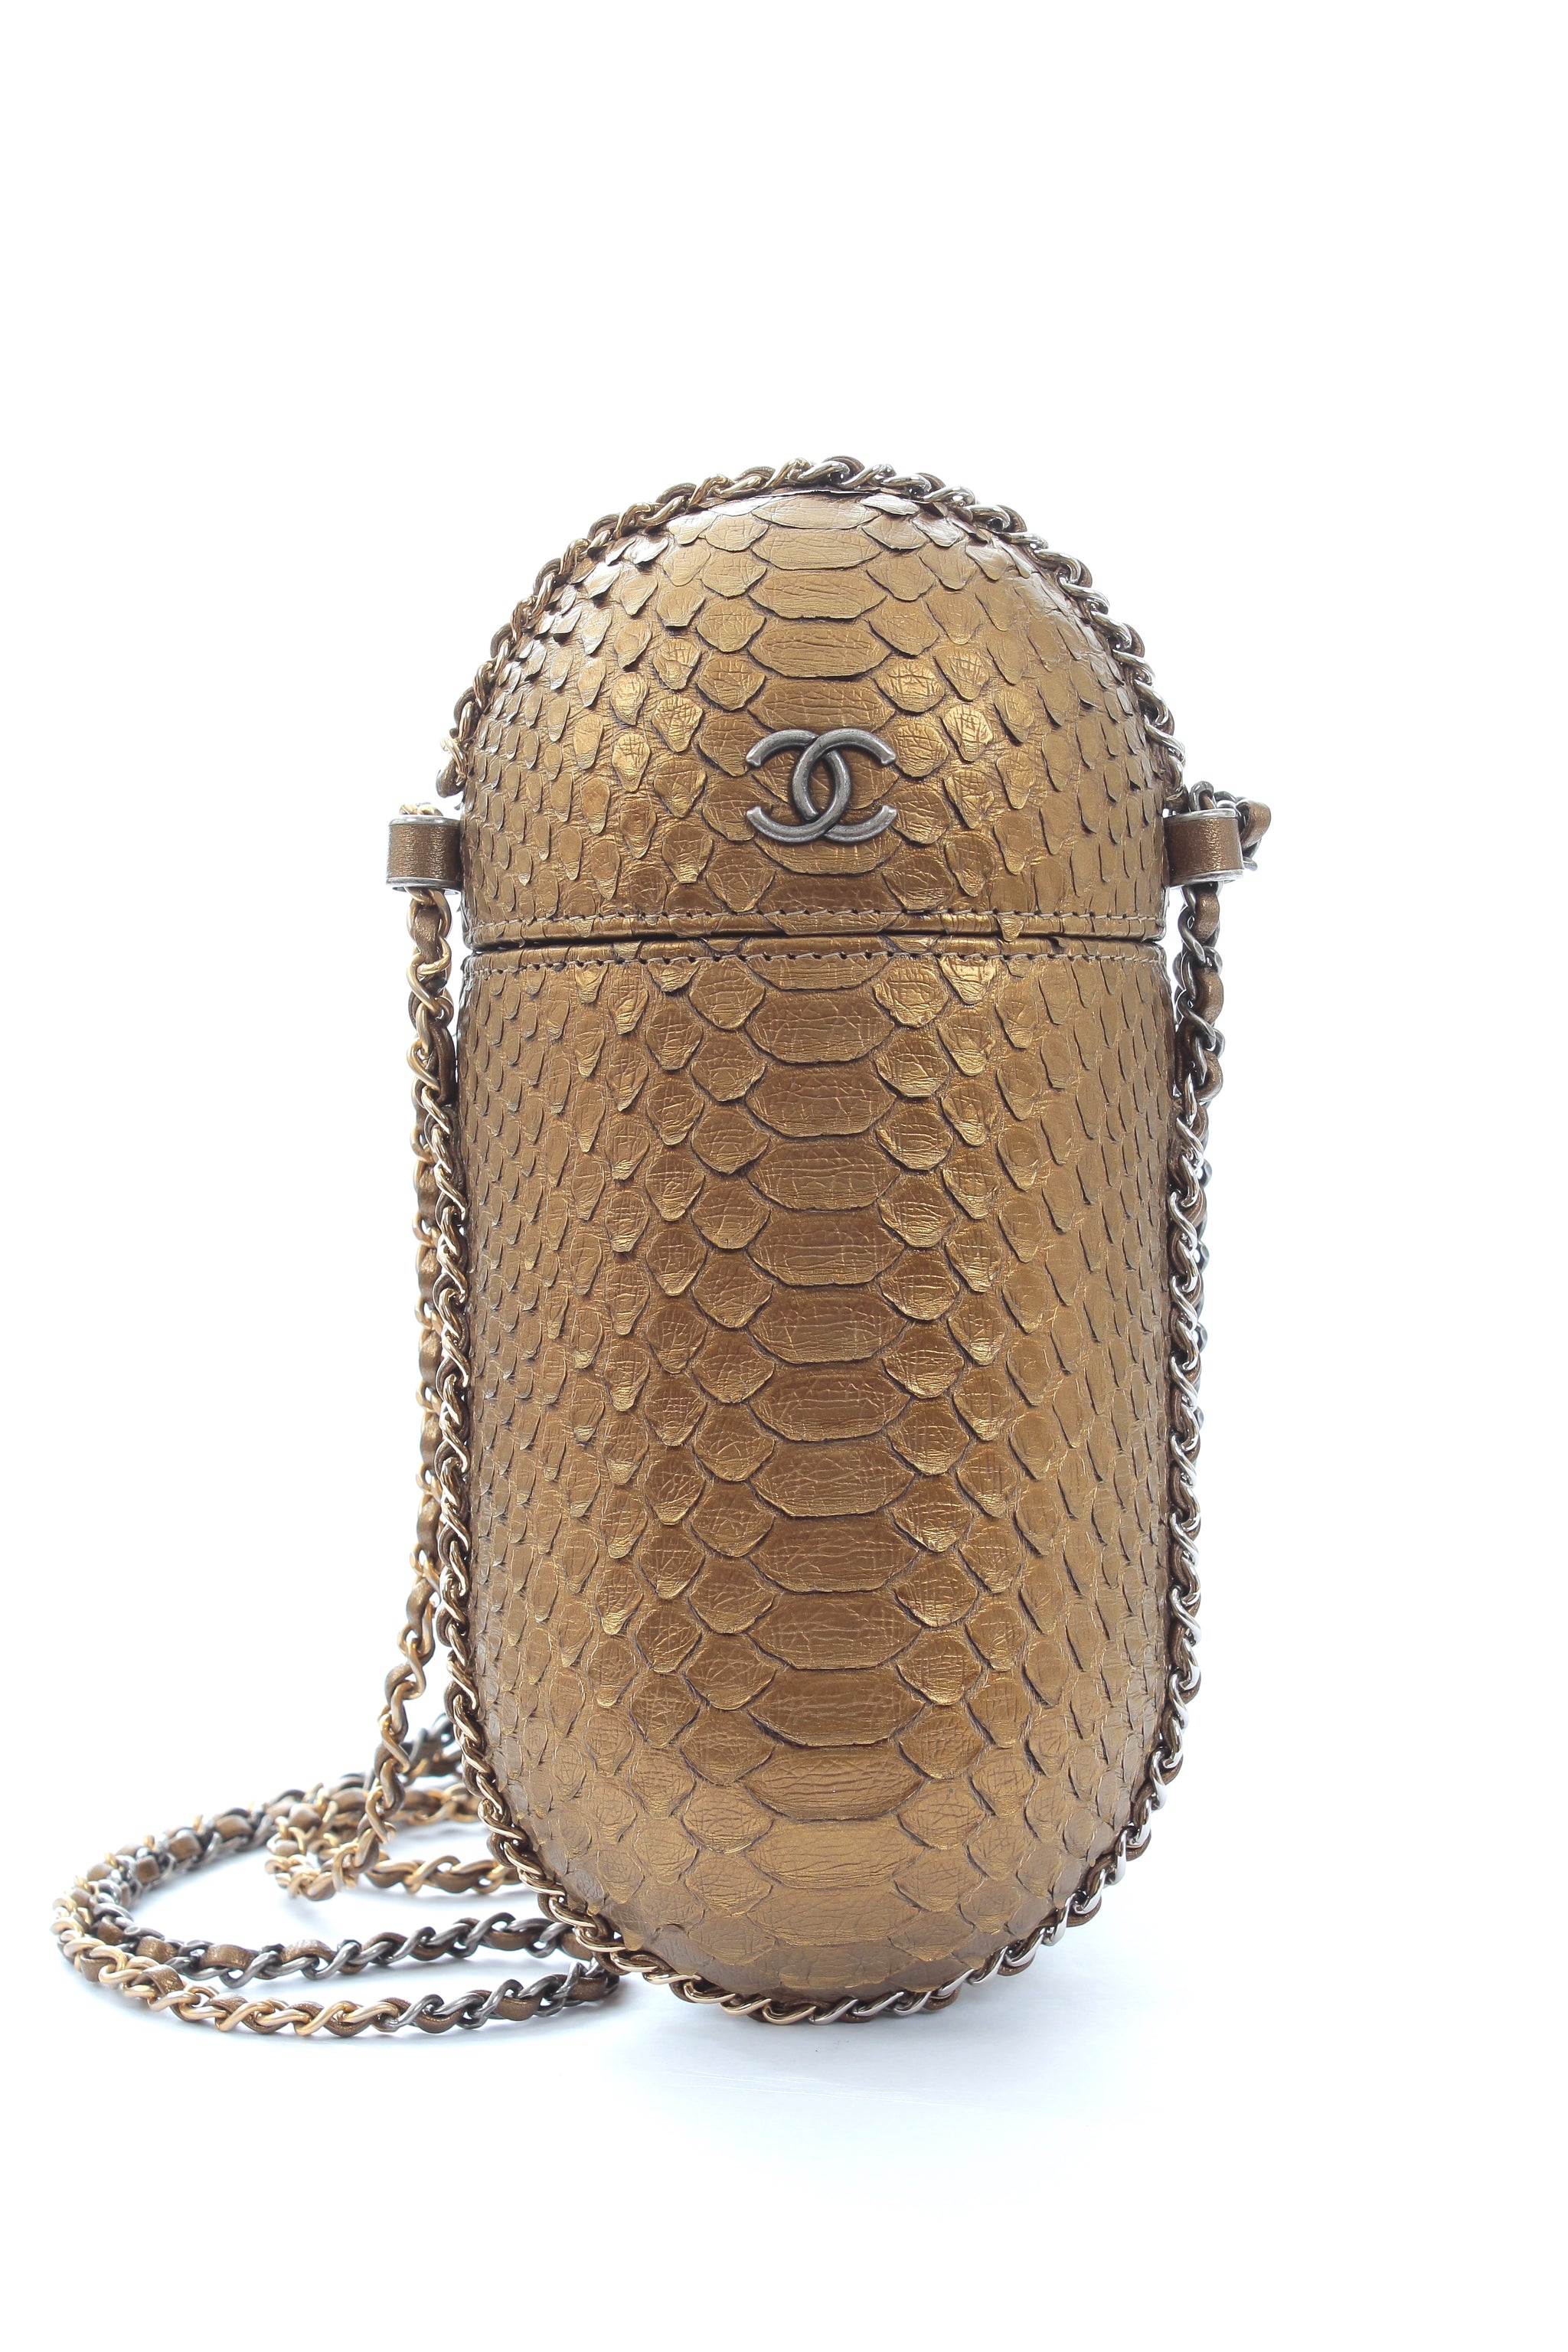 Shop Rare and Limited Edition Chanel Bags While They Last at Moda Operandi   PurseBlog